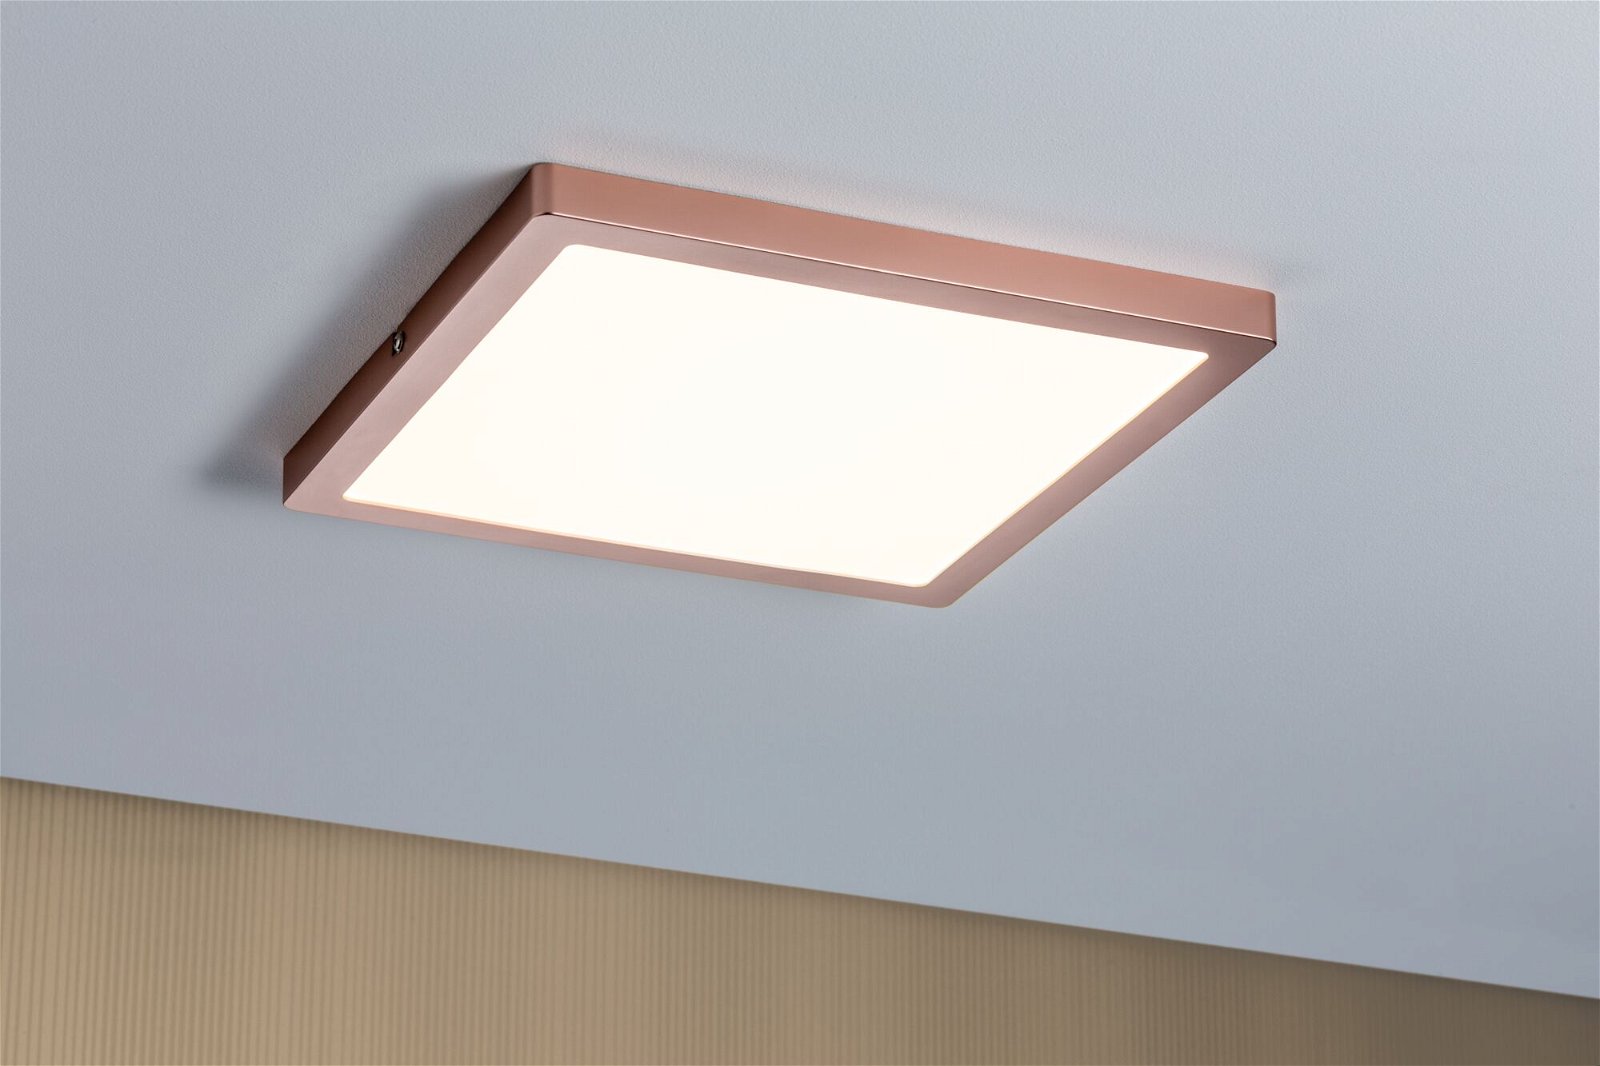 LED Panel Atria square 300x300mm 16,5W 1450lm 2700K Rosé gold dimmable